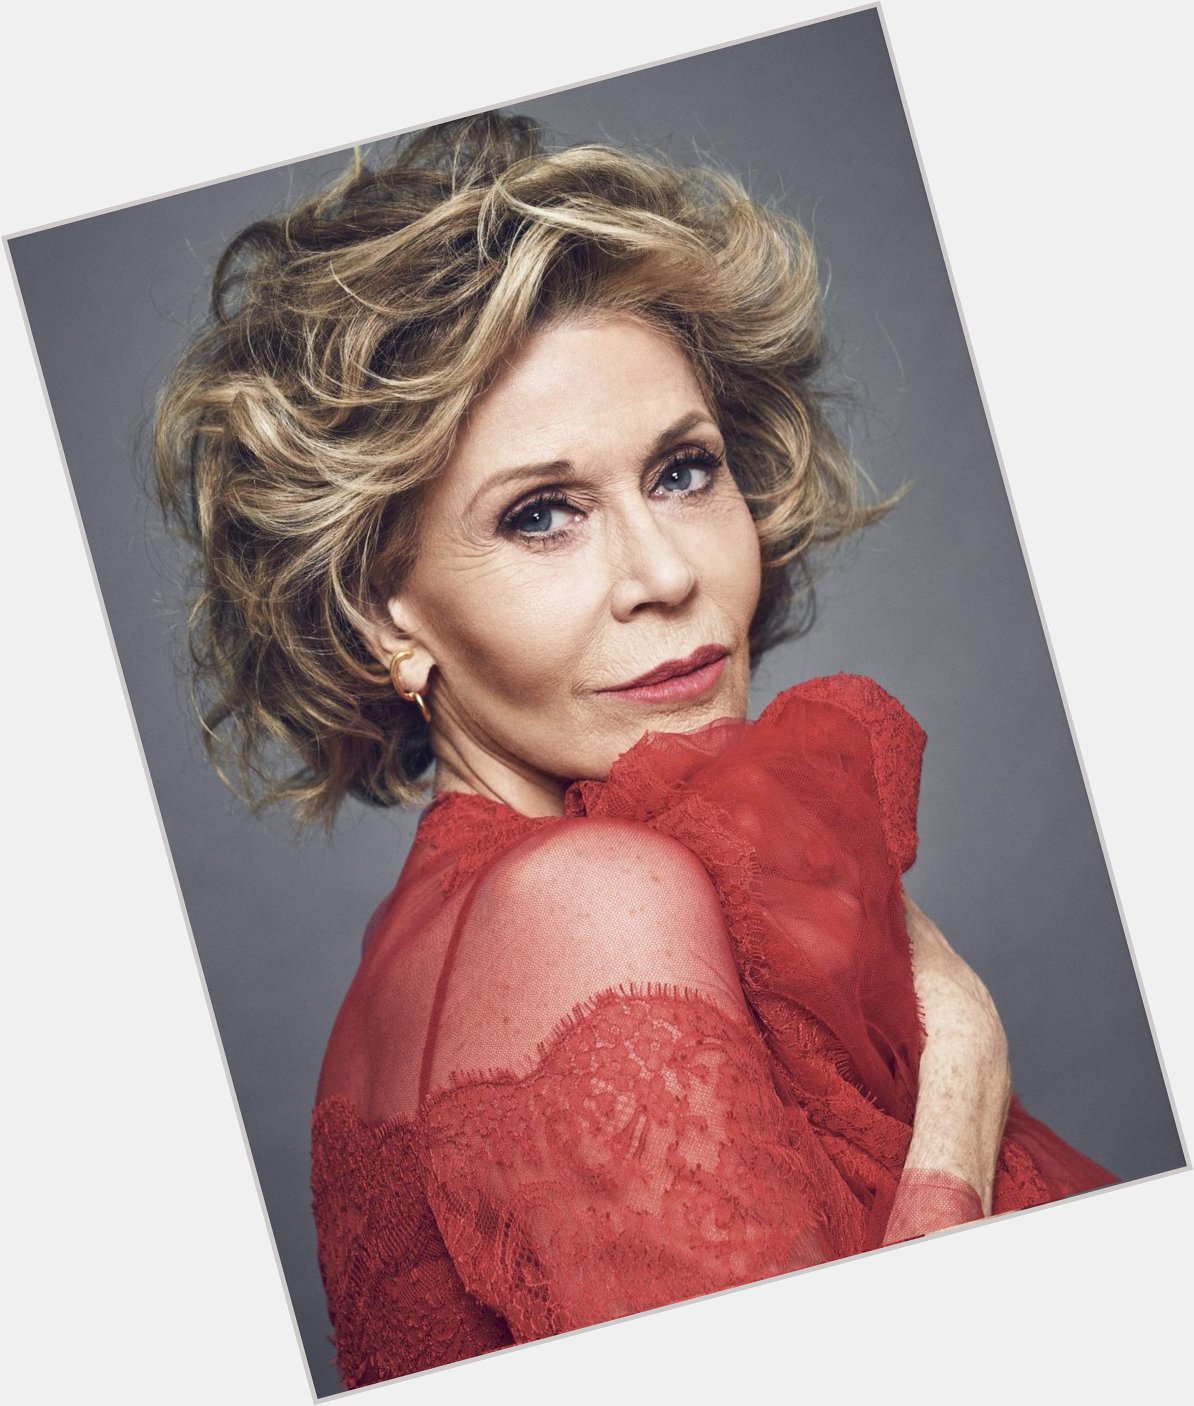 Happy birthday jane fonda the world is so lucky to have you thank you for being you 